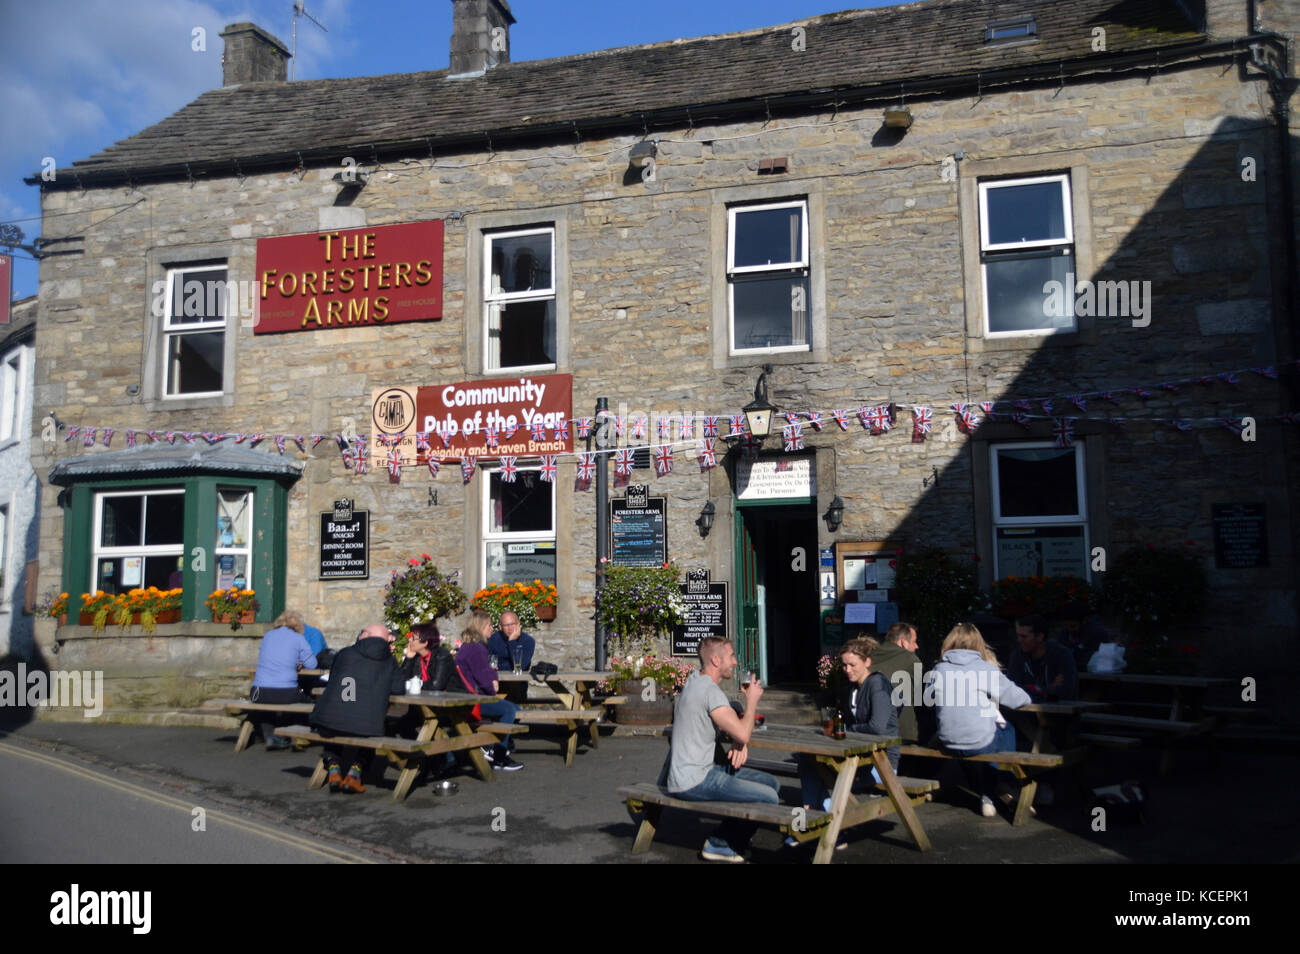 People Drinking in the Evening Sunshine at The Foresters Arms in the Village of Grassington in Wharfedale, Yorkshire Dales National Park, England, UK. Stock Photo